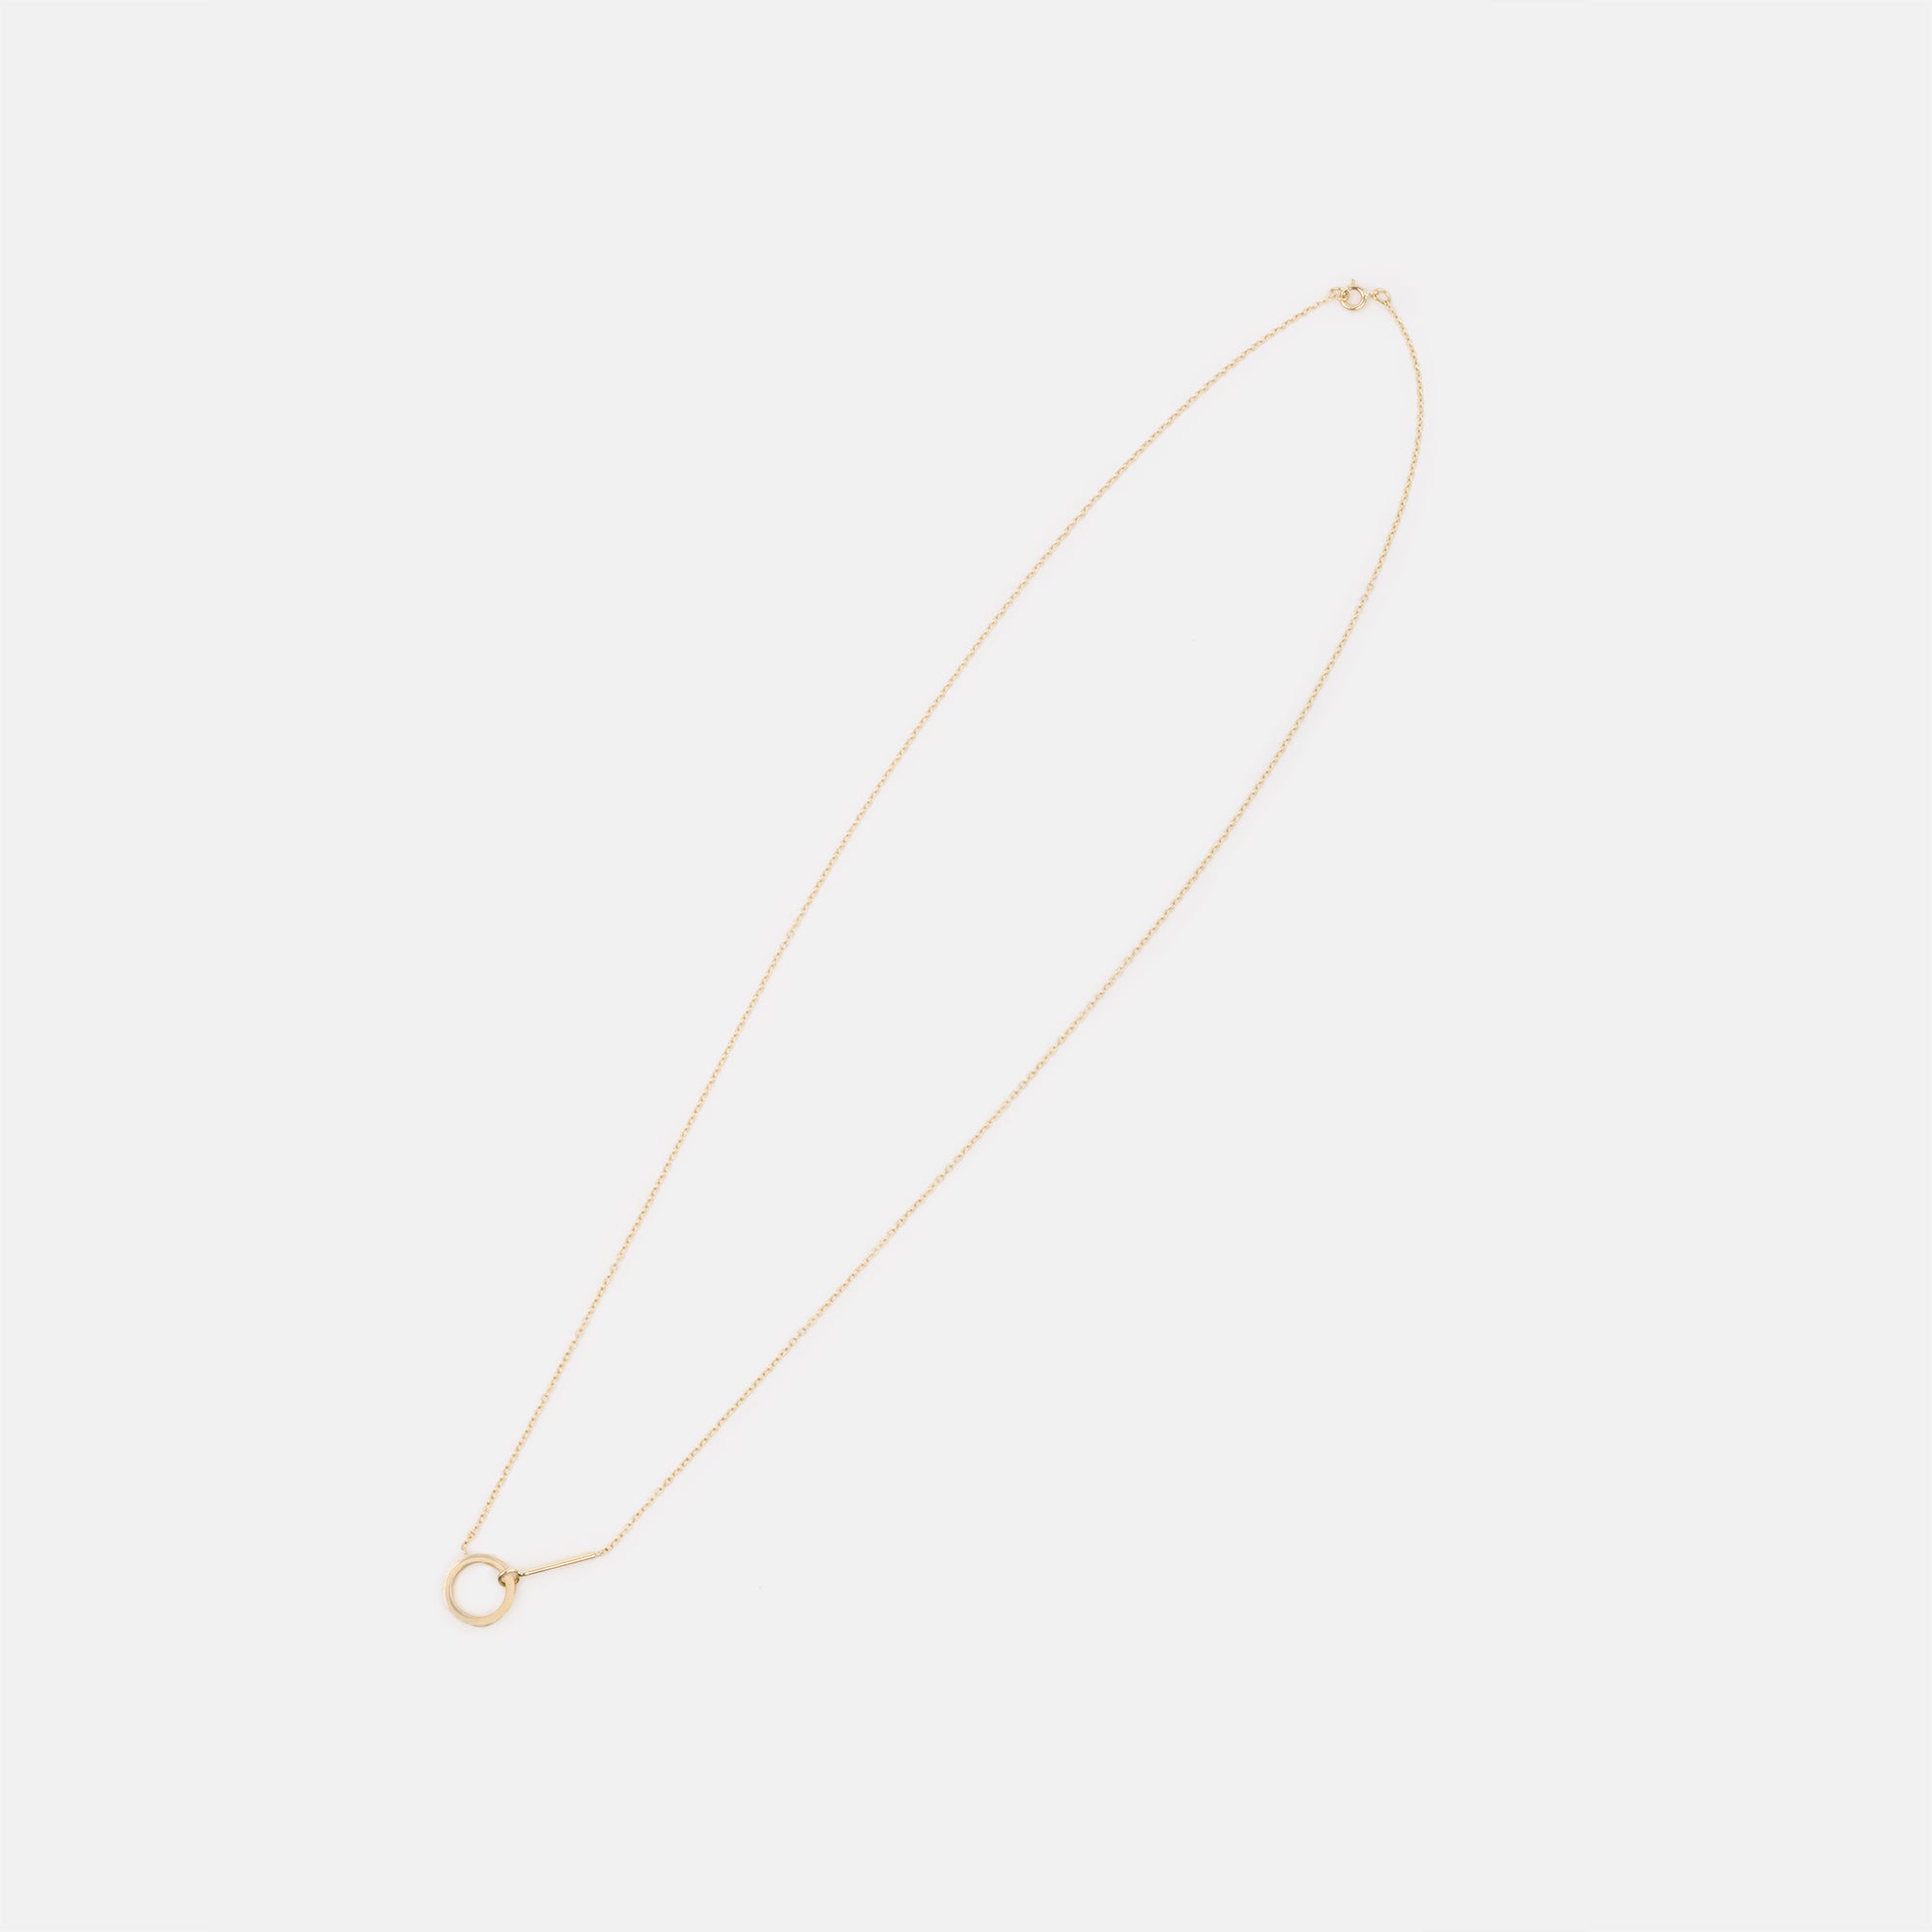 Visata Simple Necklace in 14k Gold By SHW Fine Jewelry NYC